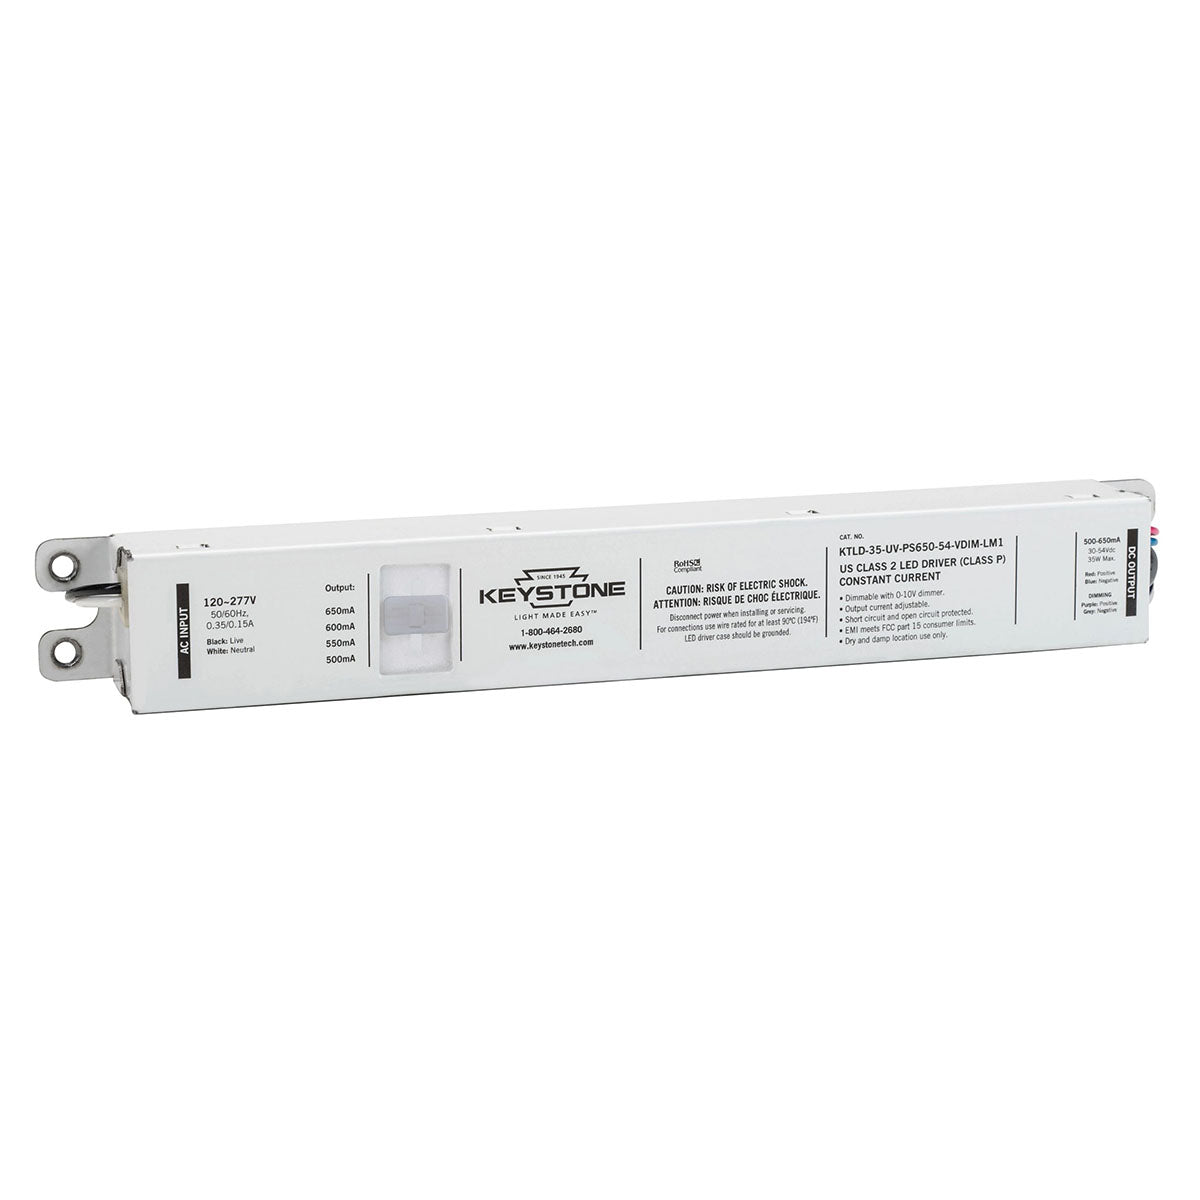 Power Select LED Driver, 35W, Adjustable Constant Current 550-650mA, 0-10V Dimming, 120-277V Input